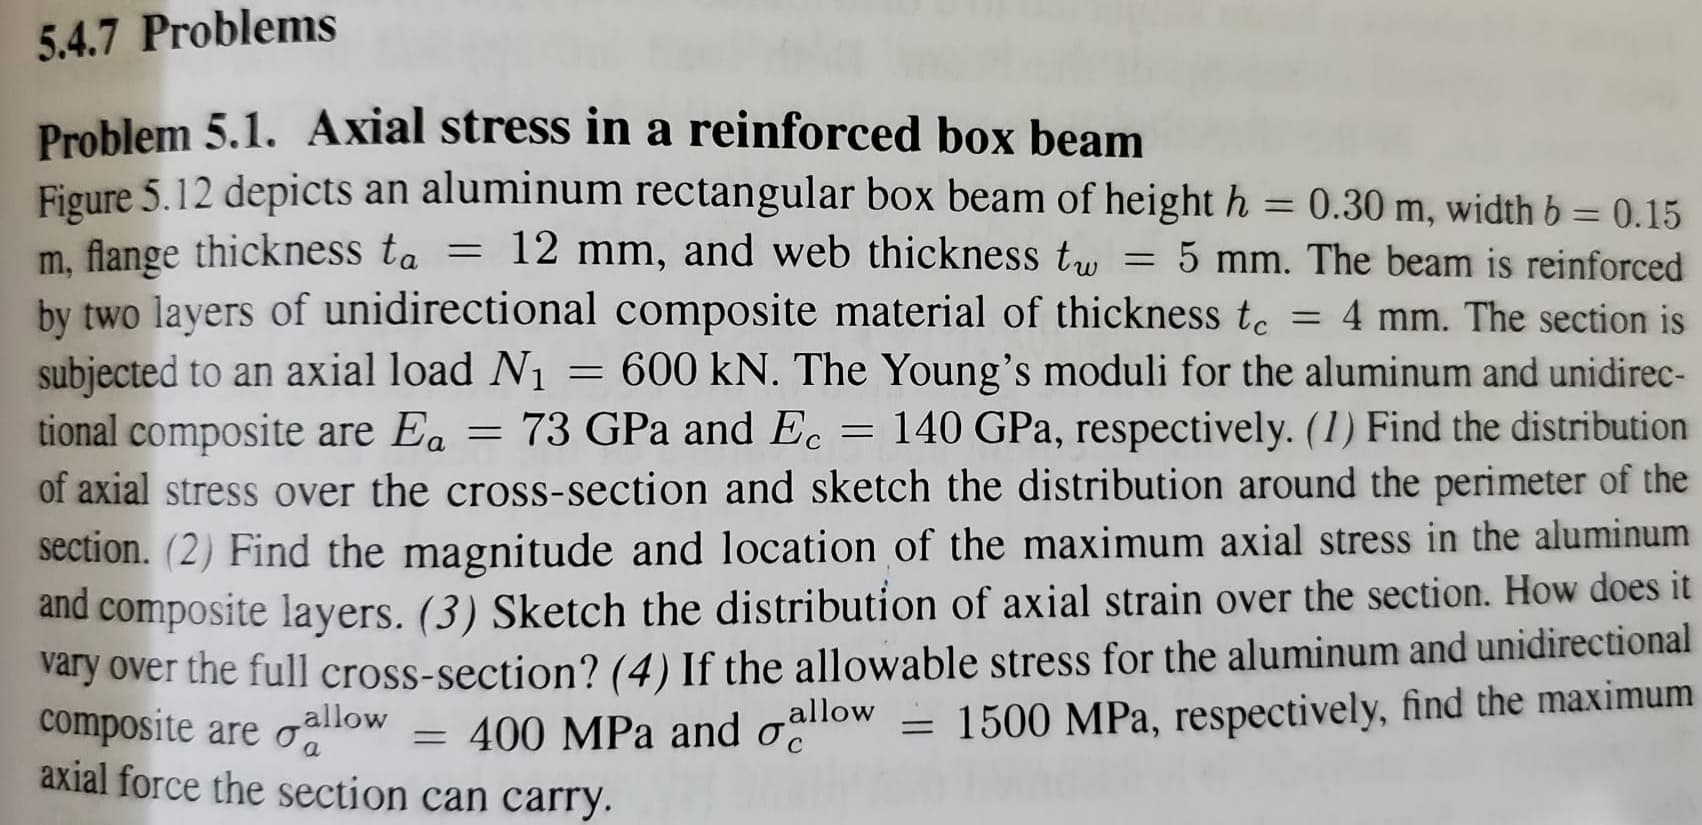 5.4.7 Problems
Problem 5.1. Axial stress in a reinforced box beam
Figure 5.12 depicts an aluminum rectangular box beam of height h = 0.30 m, width b = 0.15
%3D
m, flange thickness ta
by two layers of unidirectional composite material of thickness to
subjected to an axial load N1
tional composite are Ea = 73 GPa and Ec
of axial stress over the cross-section and sketch the distribution around the perimeter of the
section. (2) Find the magnitude and location of the maximum axial stress in the aluminum
and composite layers. (3) Sketch the distribution of axial strain over the section. How does it
vary over the full cross-section? (4) If the allowable stress for the aluminum and unidirectional
composite are
axial force the section can carry.
= 12 mm, and web thickness tu
5 mm. The beam is reinforced
= 4 mm. The section is
= 600 kN. The Young's moduli for the aluminum and unidirec-
140 GPa, respectively. (1) Find the distribution
allow
allow
= 1500 MPa, respectively, find the maximum
= 400 MPa and o
